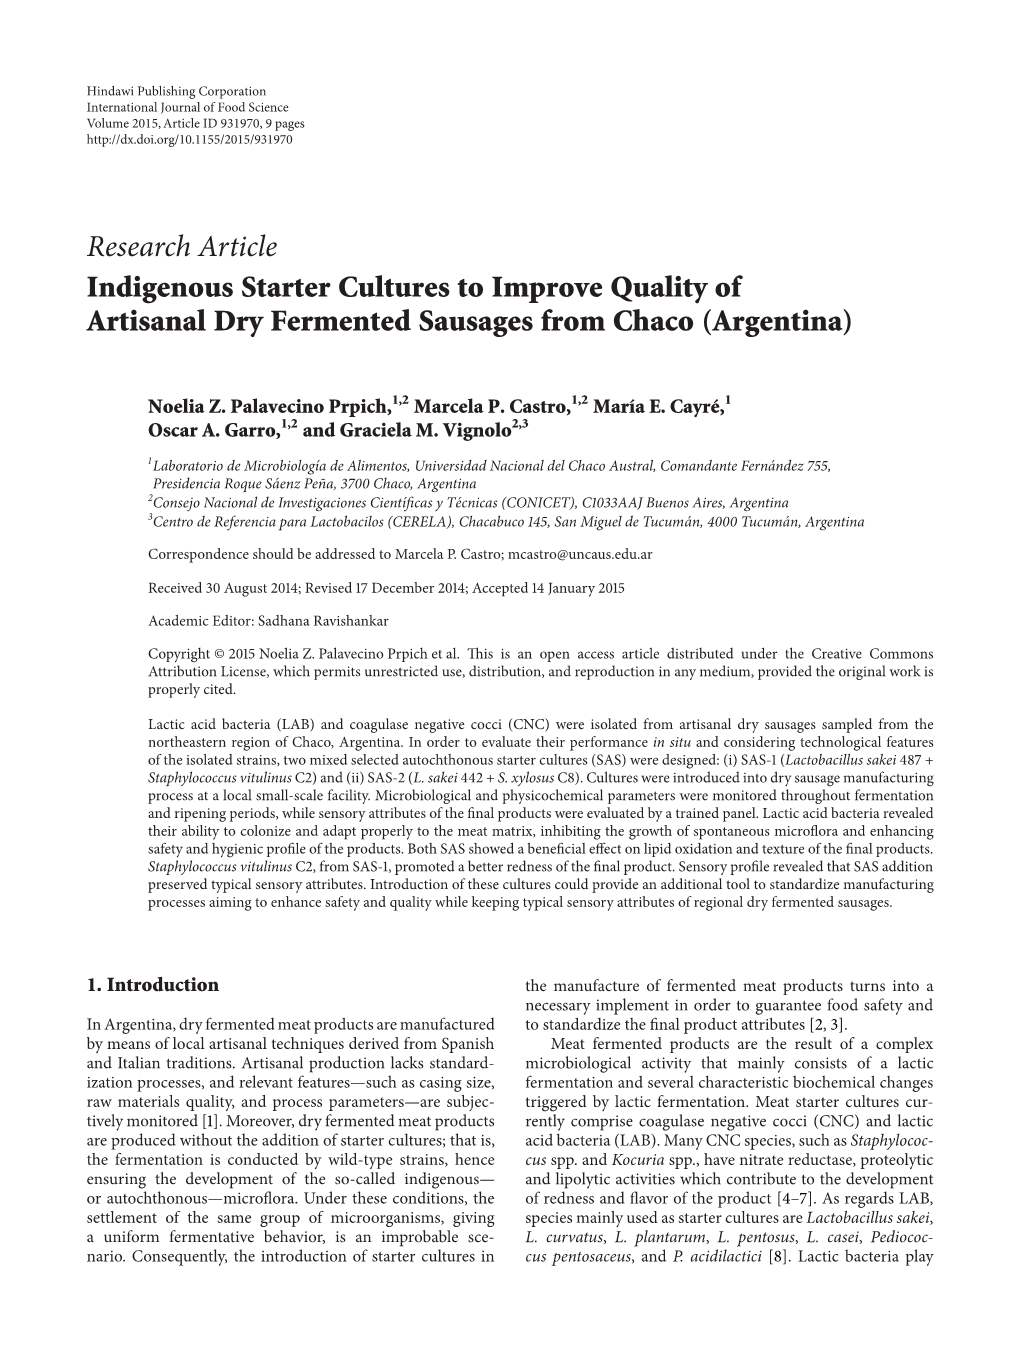 Research Article Indigenous Starter Cultures to Improve Quality of Artisanal Dry Fermented Sausages from Chaco (Argentina)